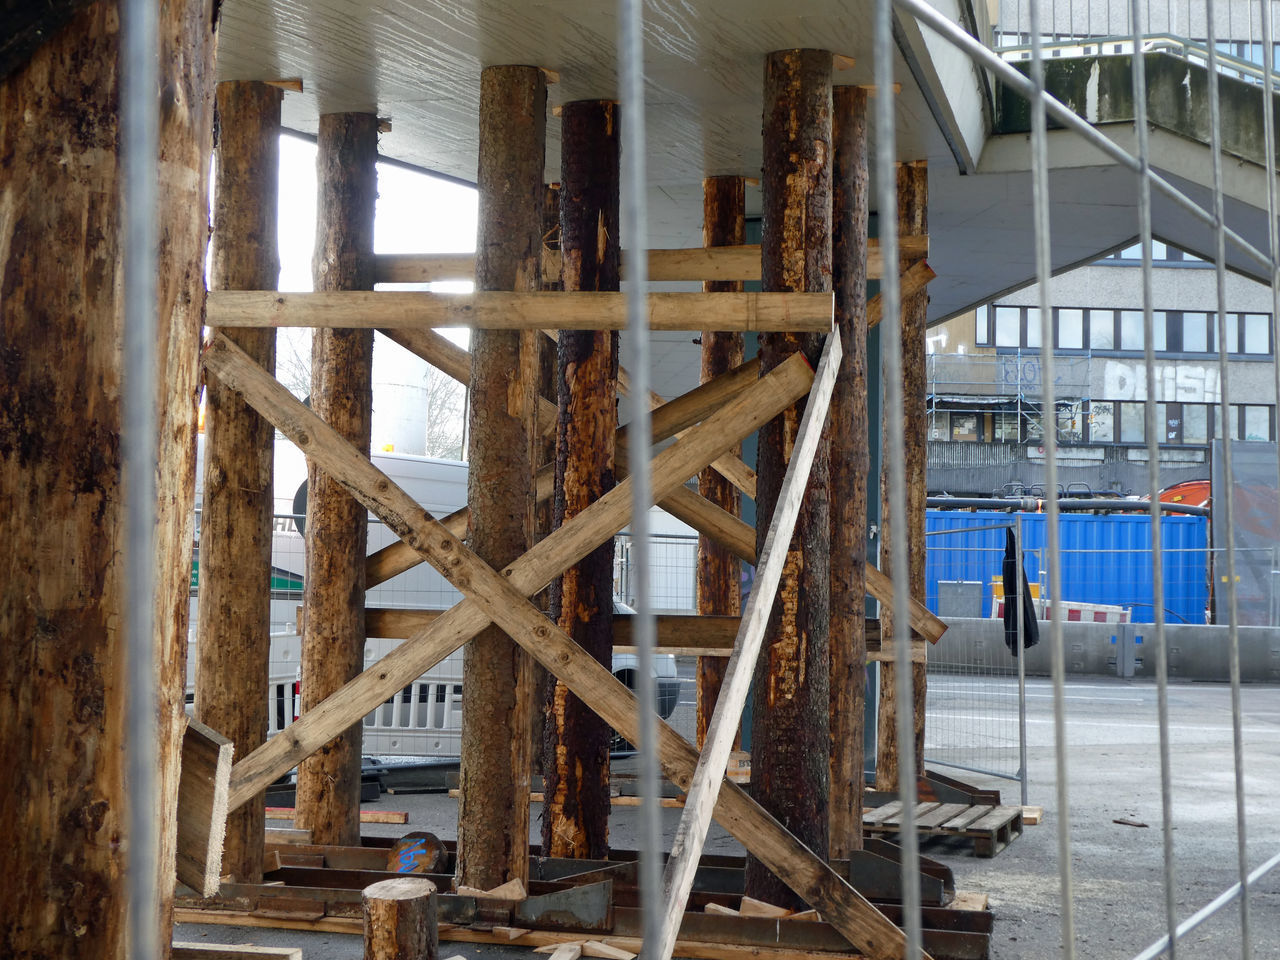 CLOSE-UP OF SCAFFOLDING